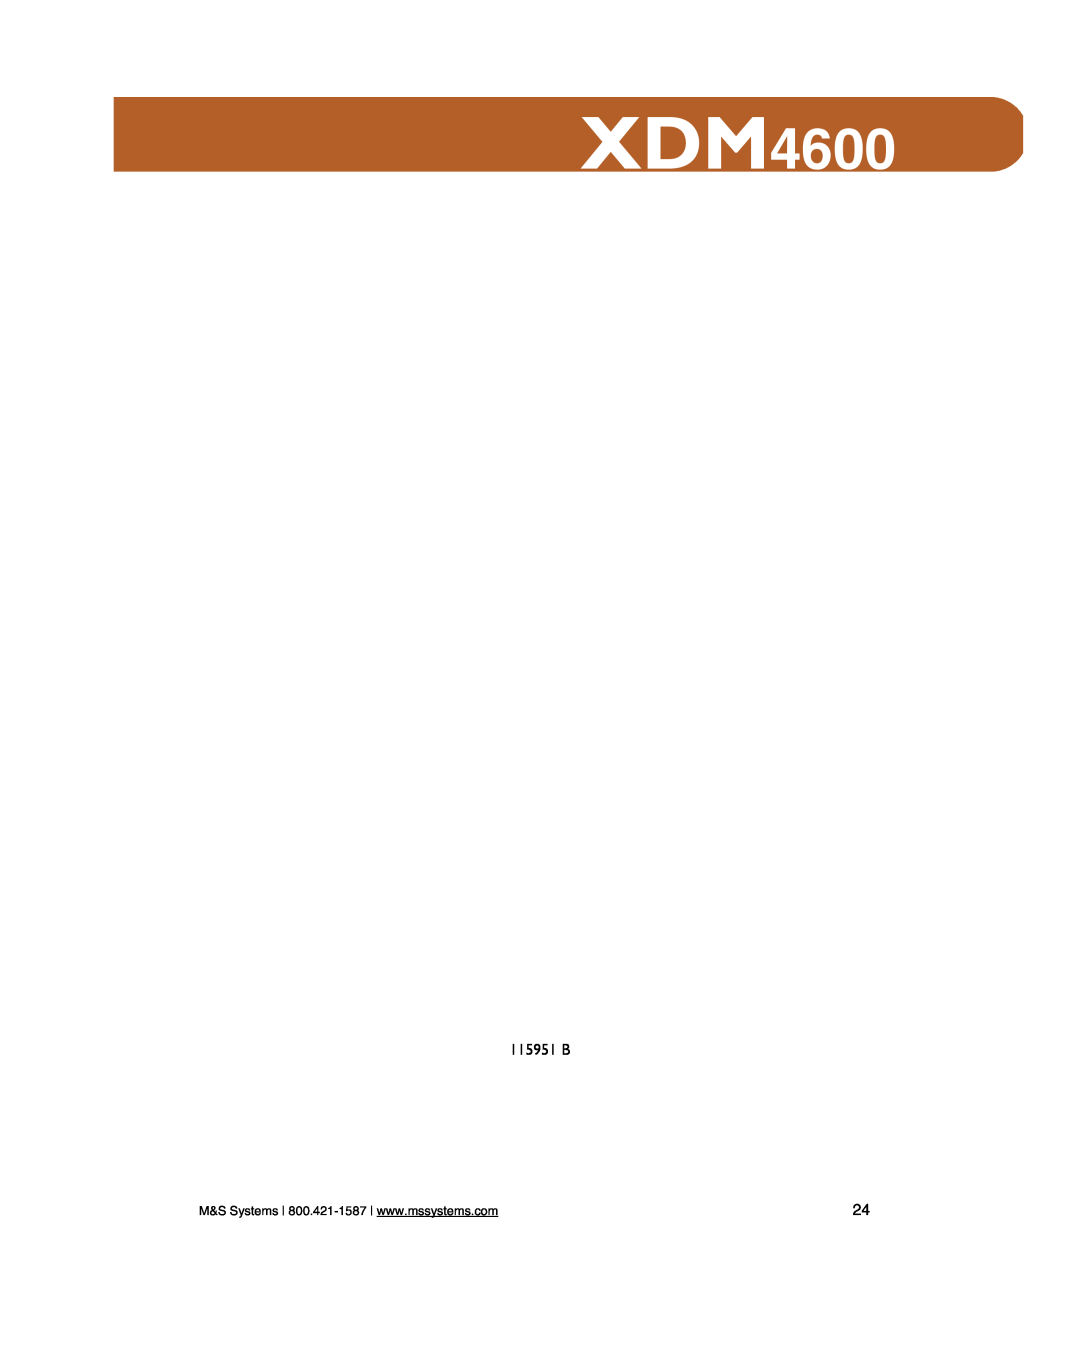 M&S Systems XDM4600 owner manual 115951 B 